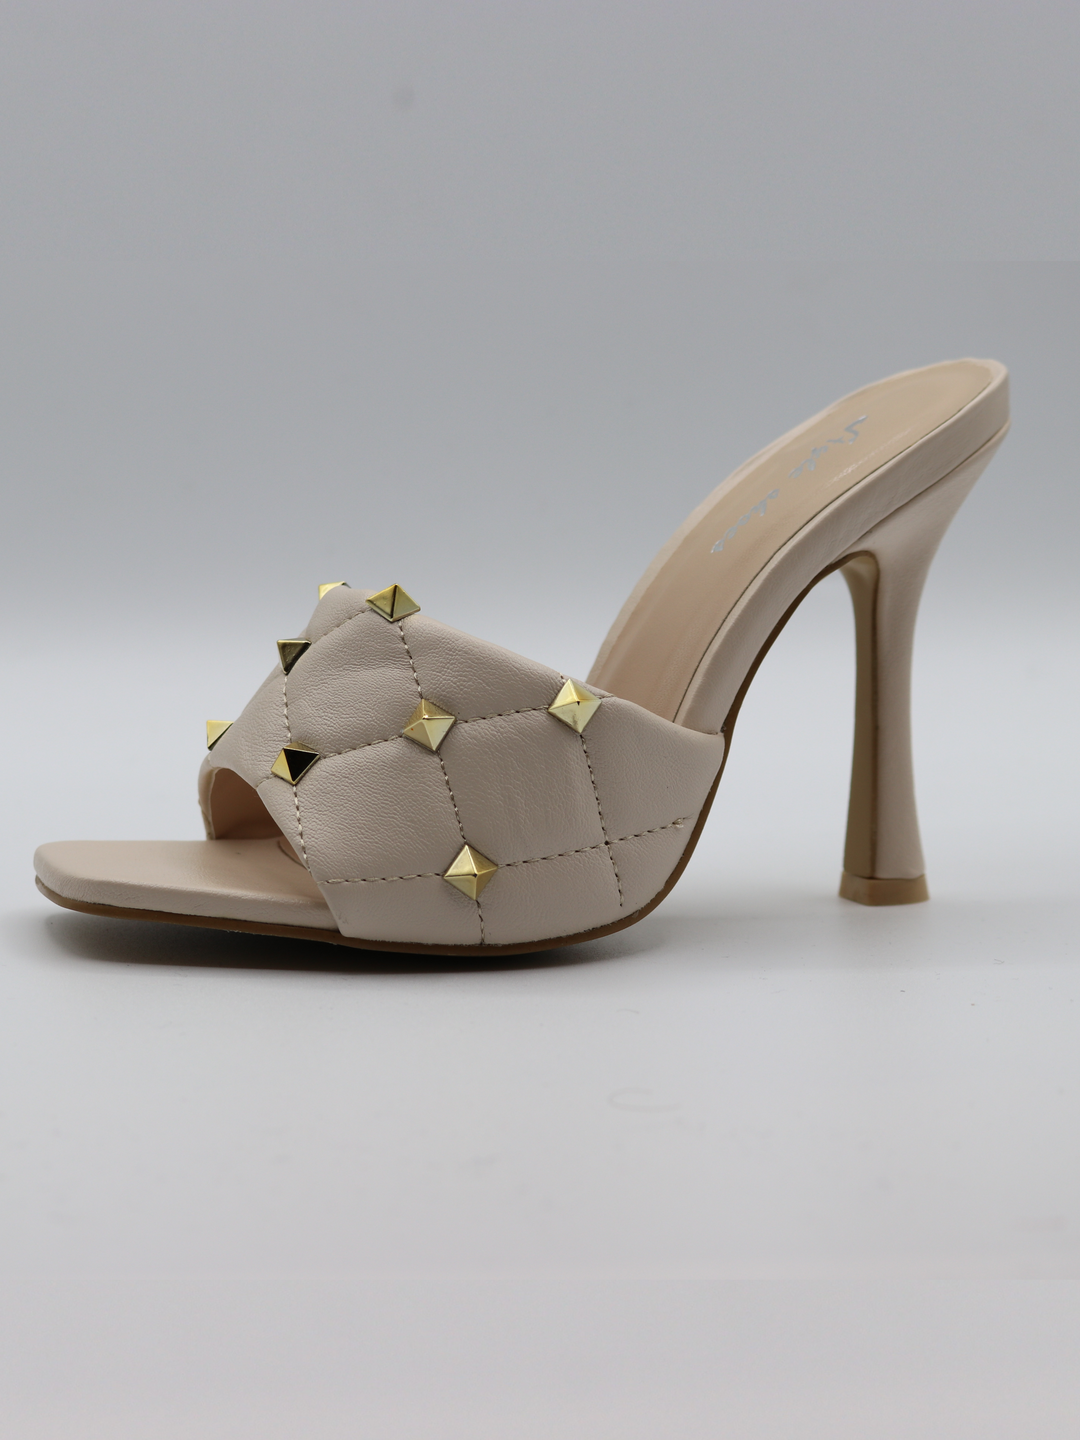 Cream quilted faux leather mule heels with gold studded heels. Photo shows the shoes from the side against a white backdrop.